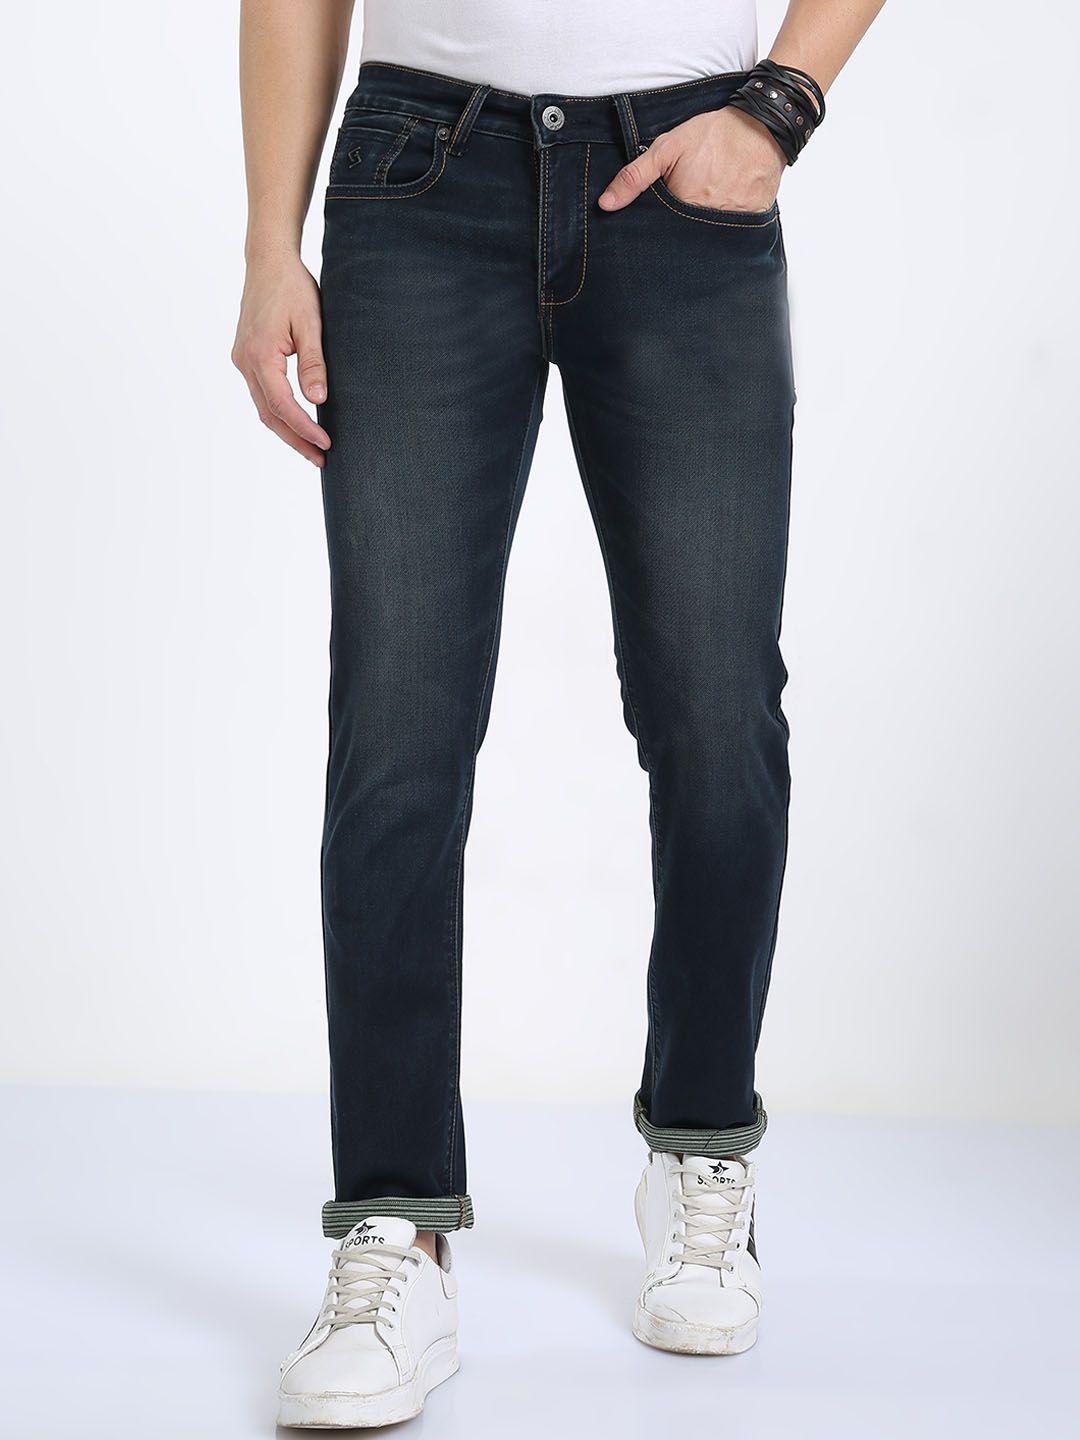 classic-polo-men-jean-slim-fit-light-fade-clean-look-stretchable-jeans